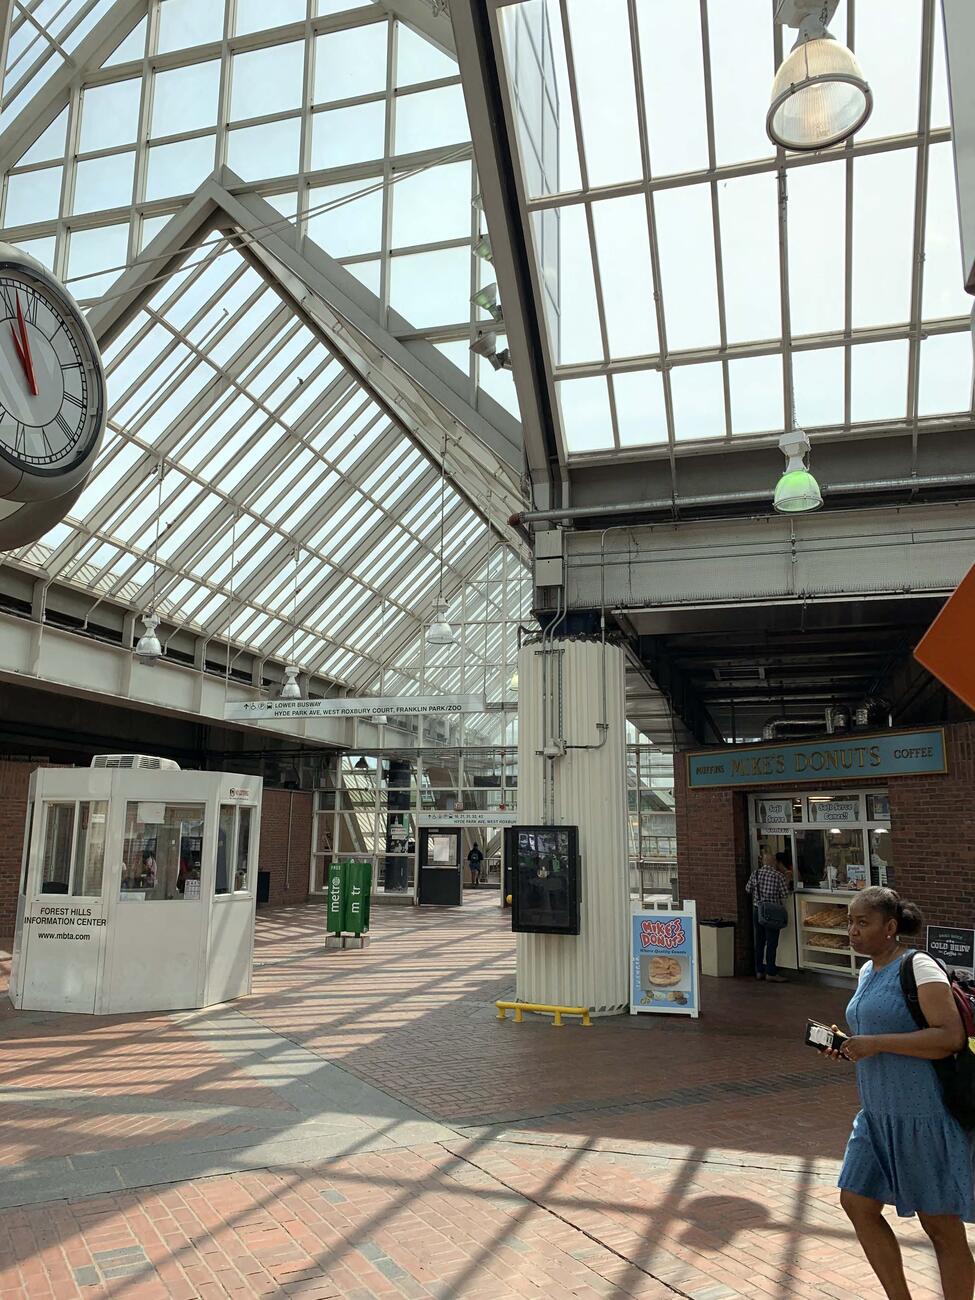 The Forest Hills Station lobby. The information kiosk and big station clock are in the photo